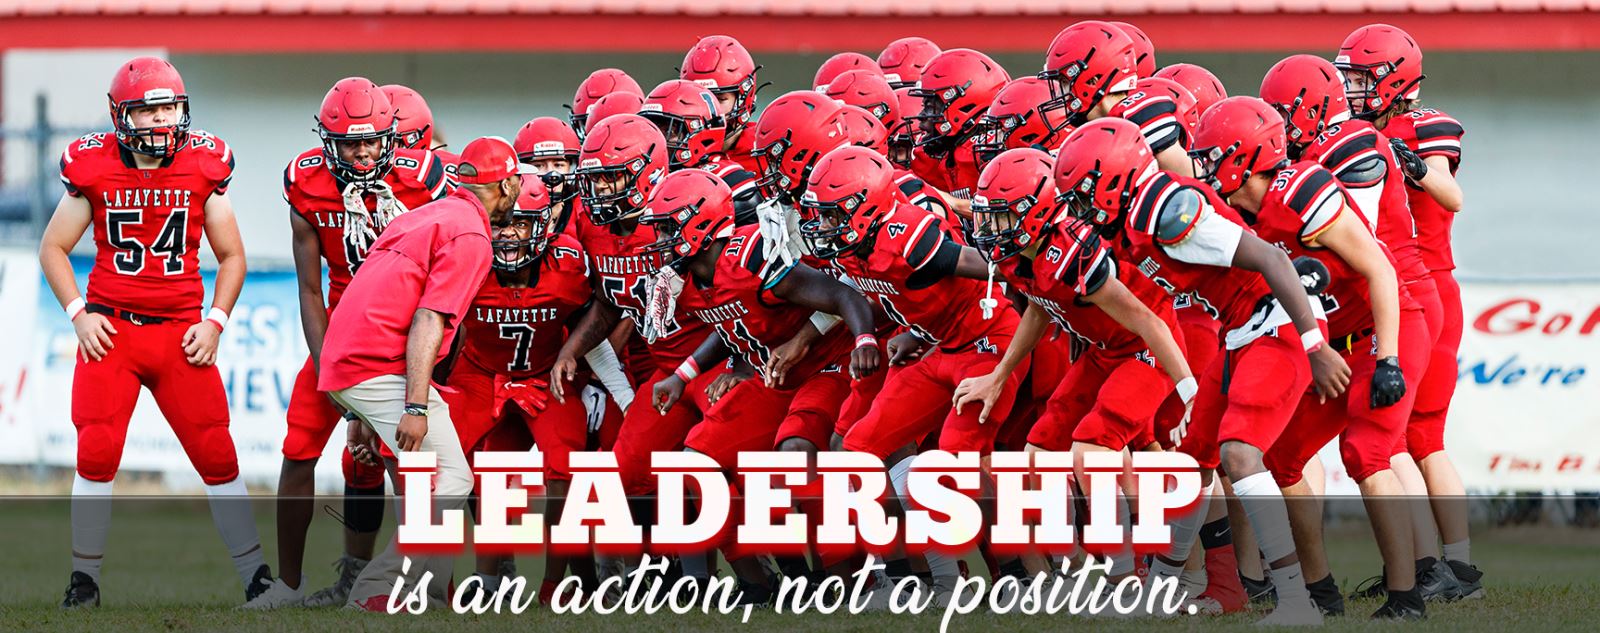 Leadership is an action, not a position.